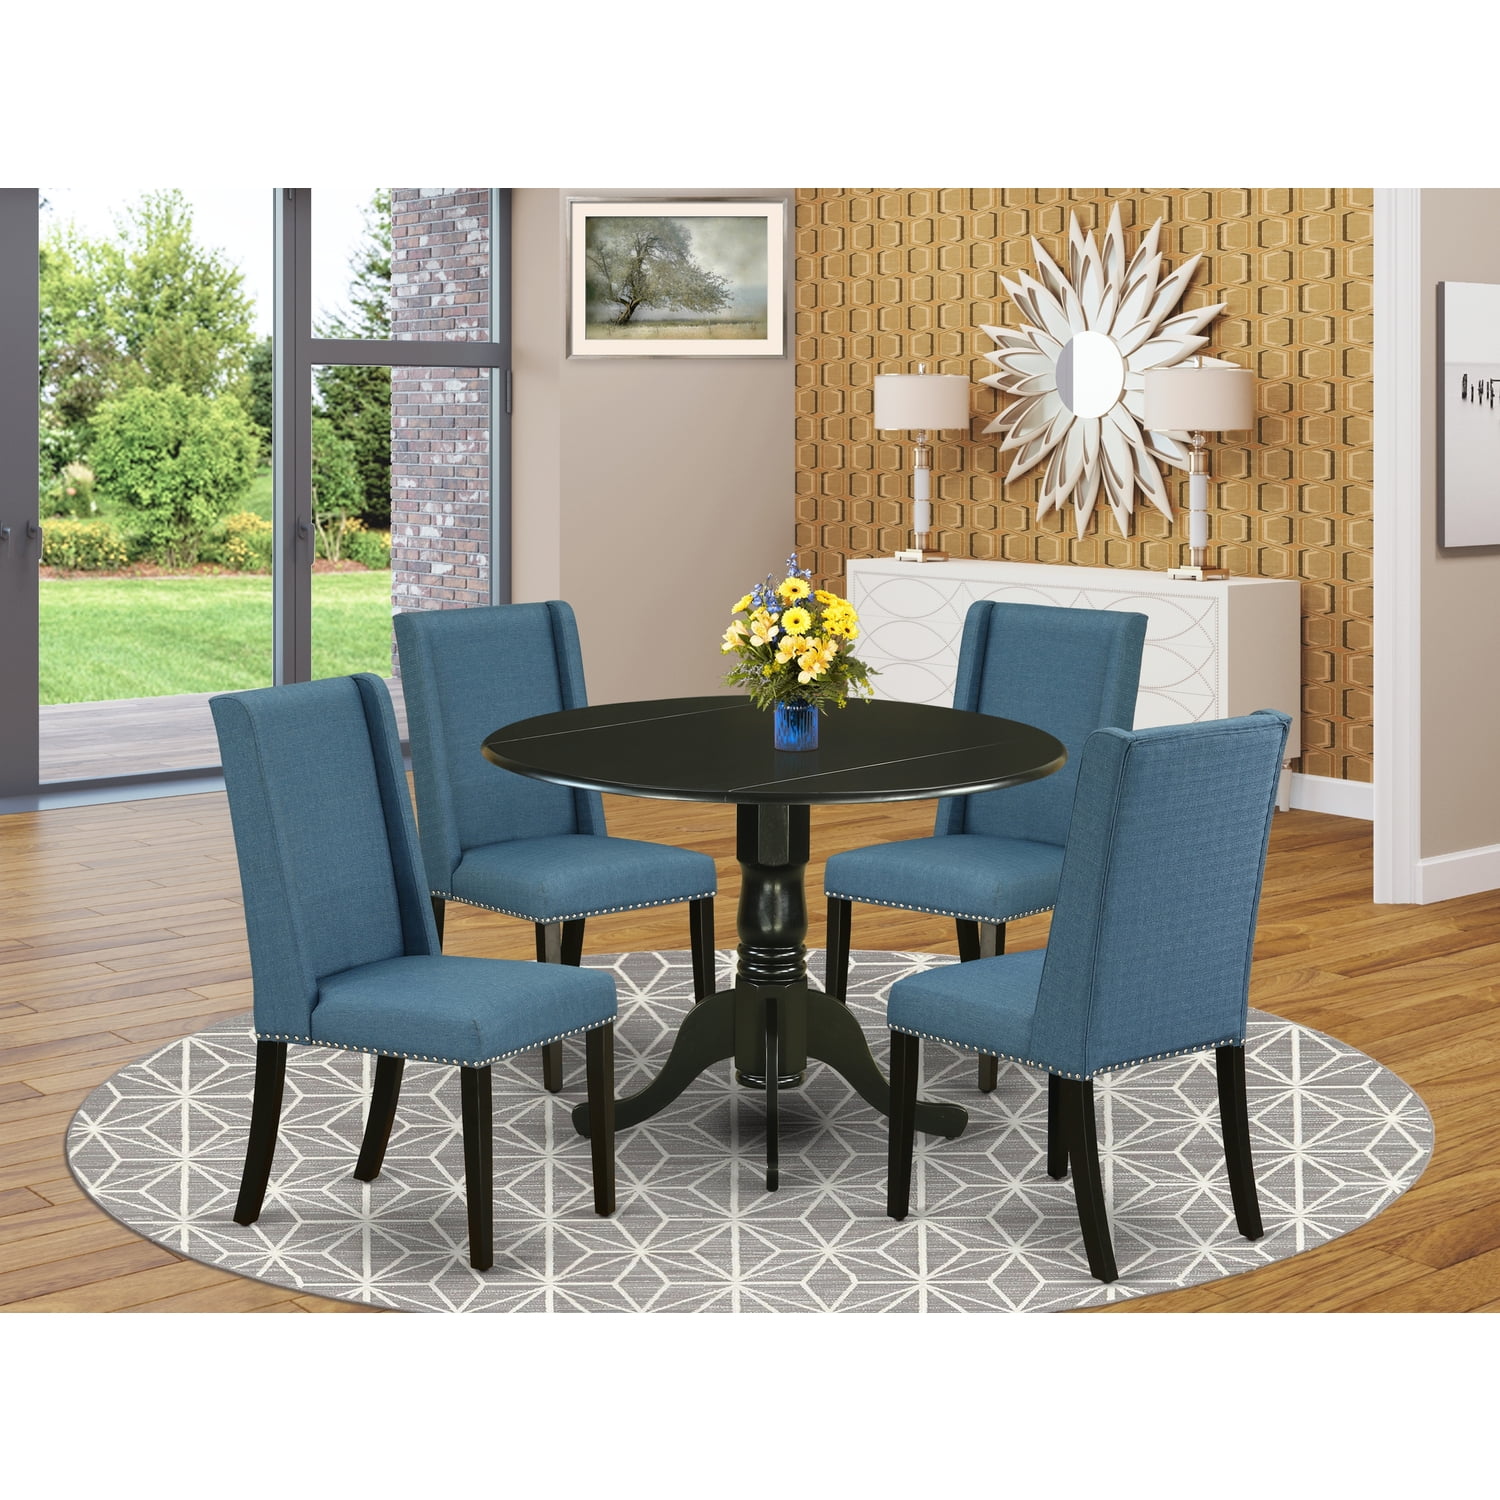 Blue for Dining Room Kitchen Lounge Living Room Office 4 Chairs Set Dining Room Chairs 4 Furniture with Soft Fabric Backrest Seat and Iron Legs 